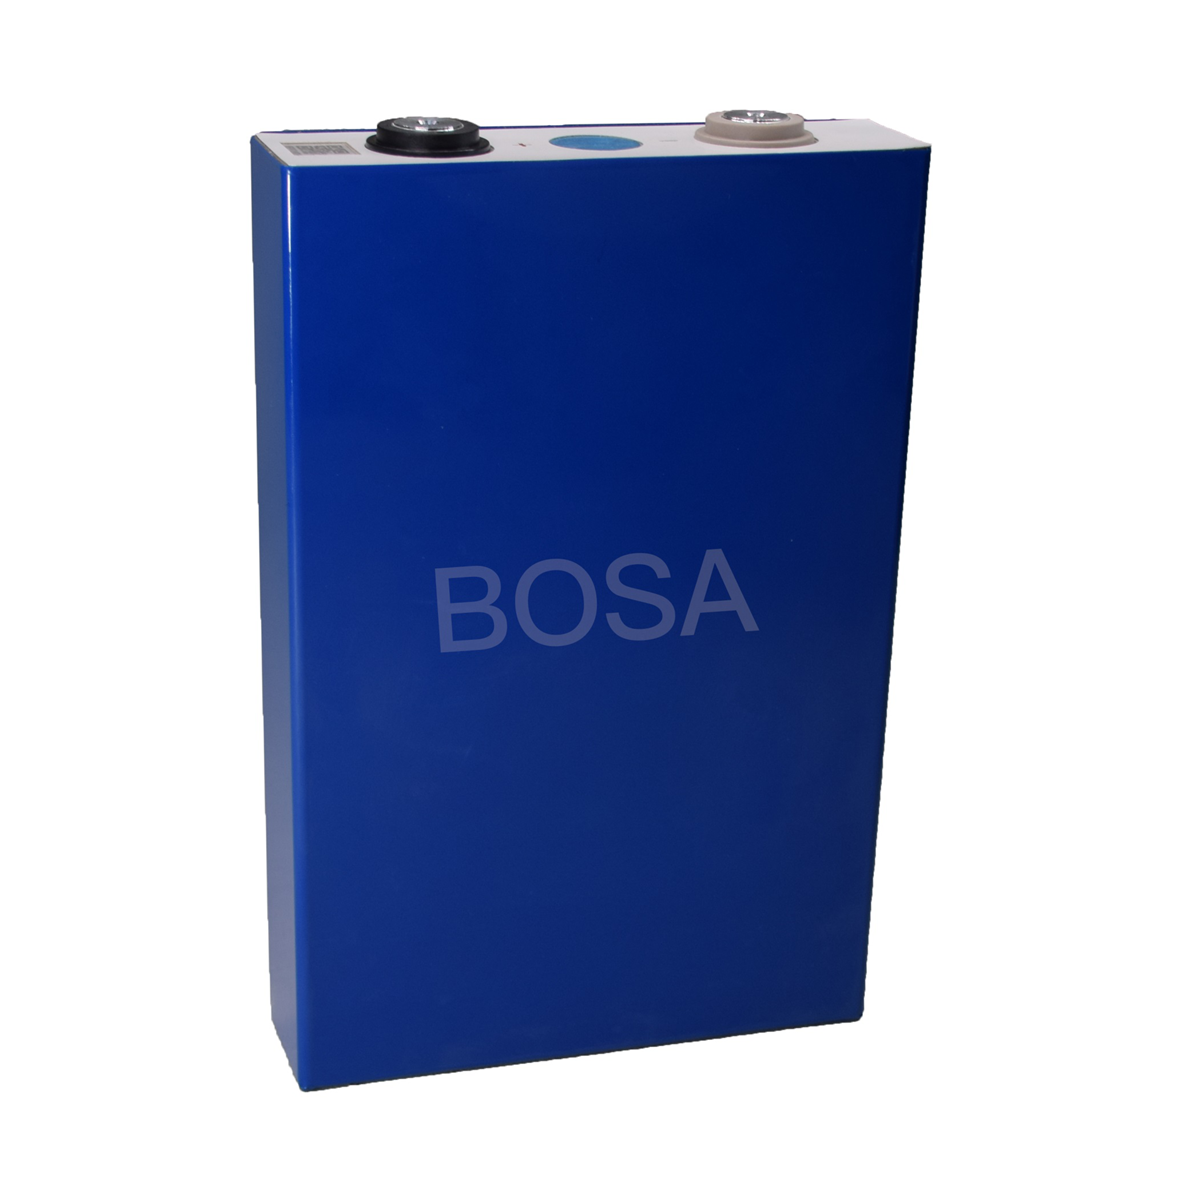 Electrical Equipment Supplies Batteries Rechargeable hot new convenient product